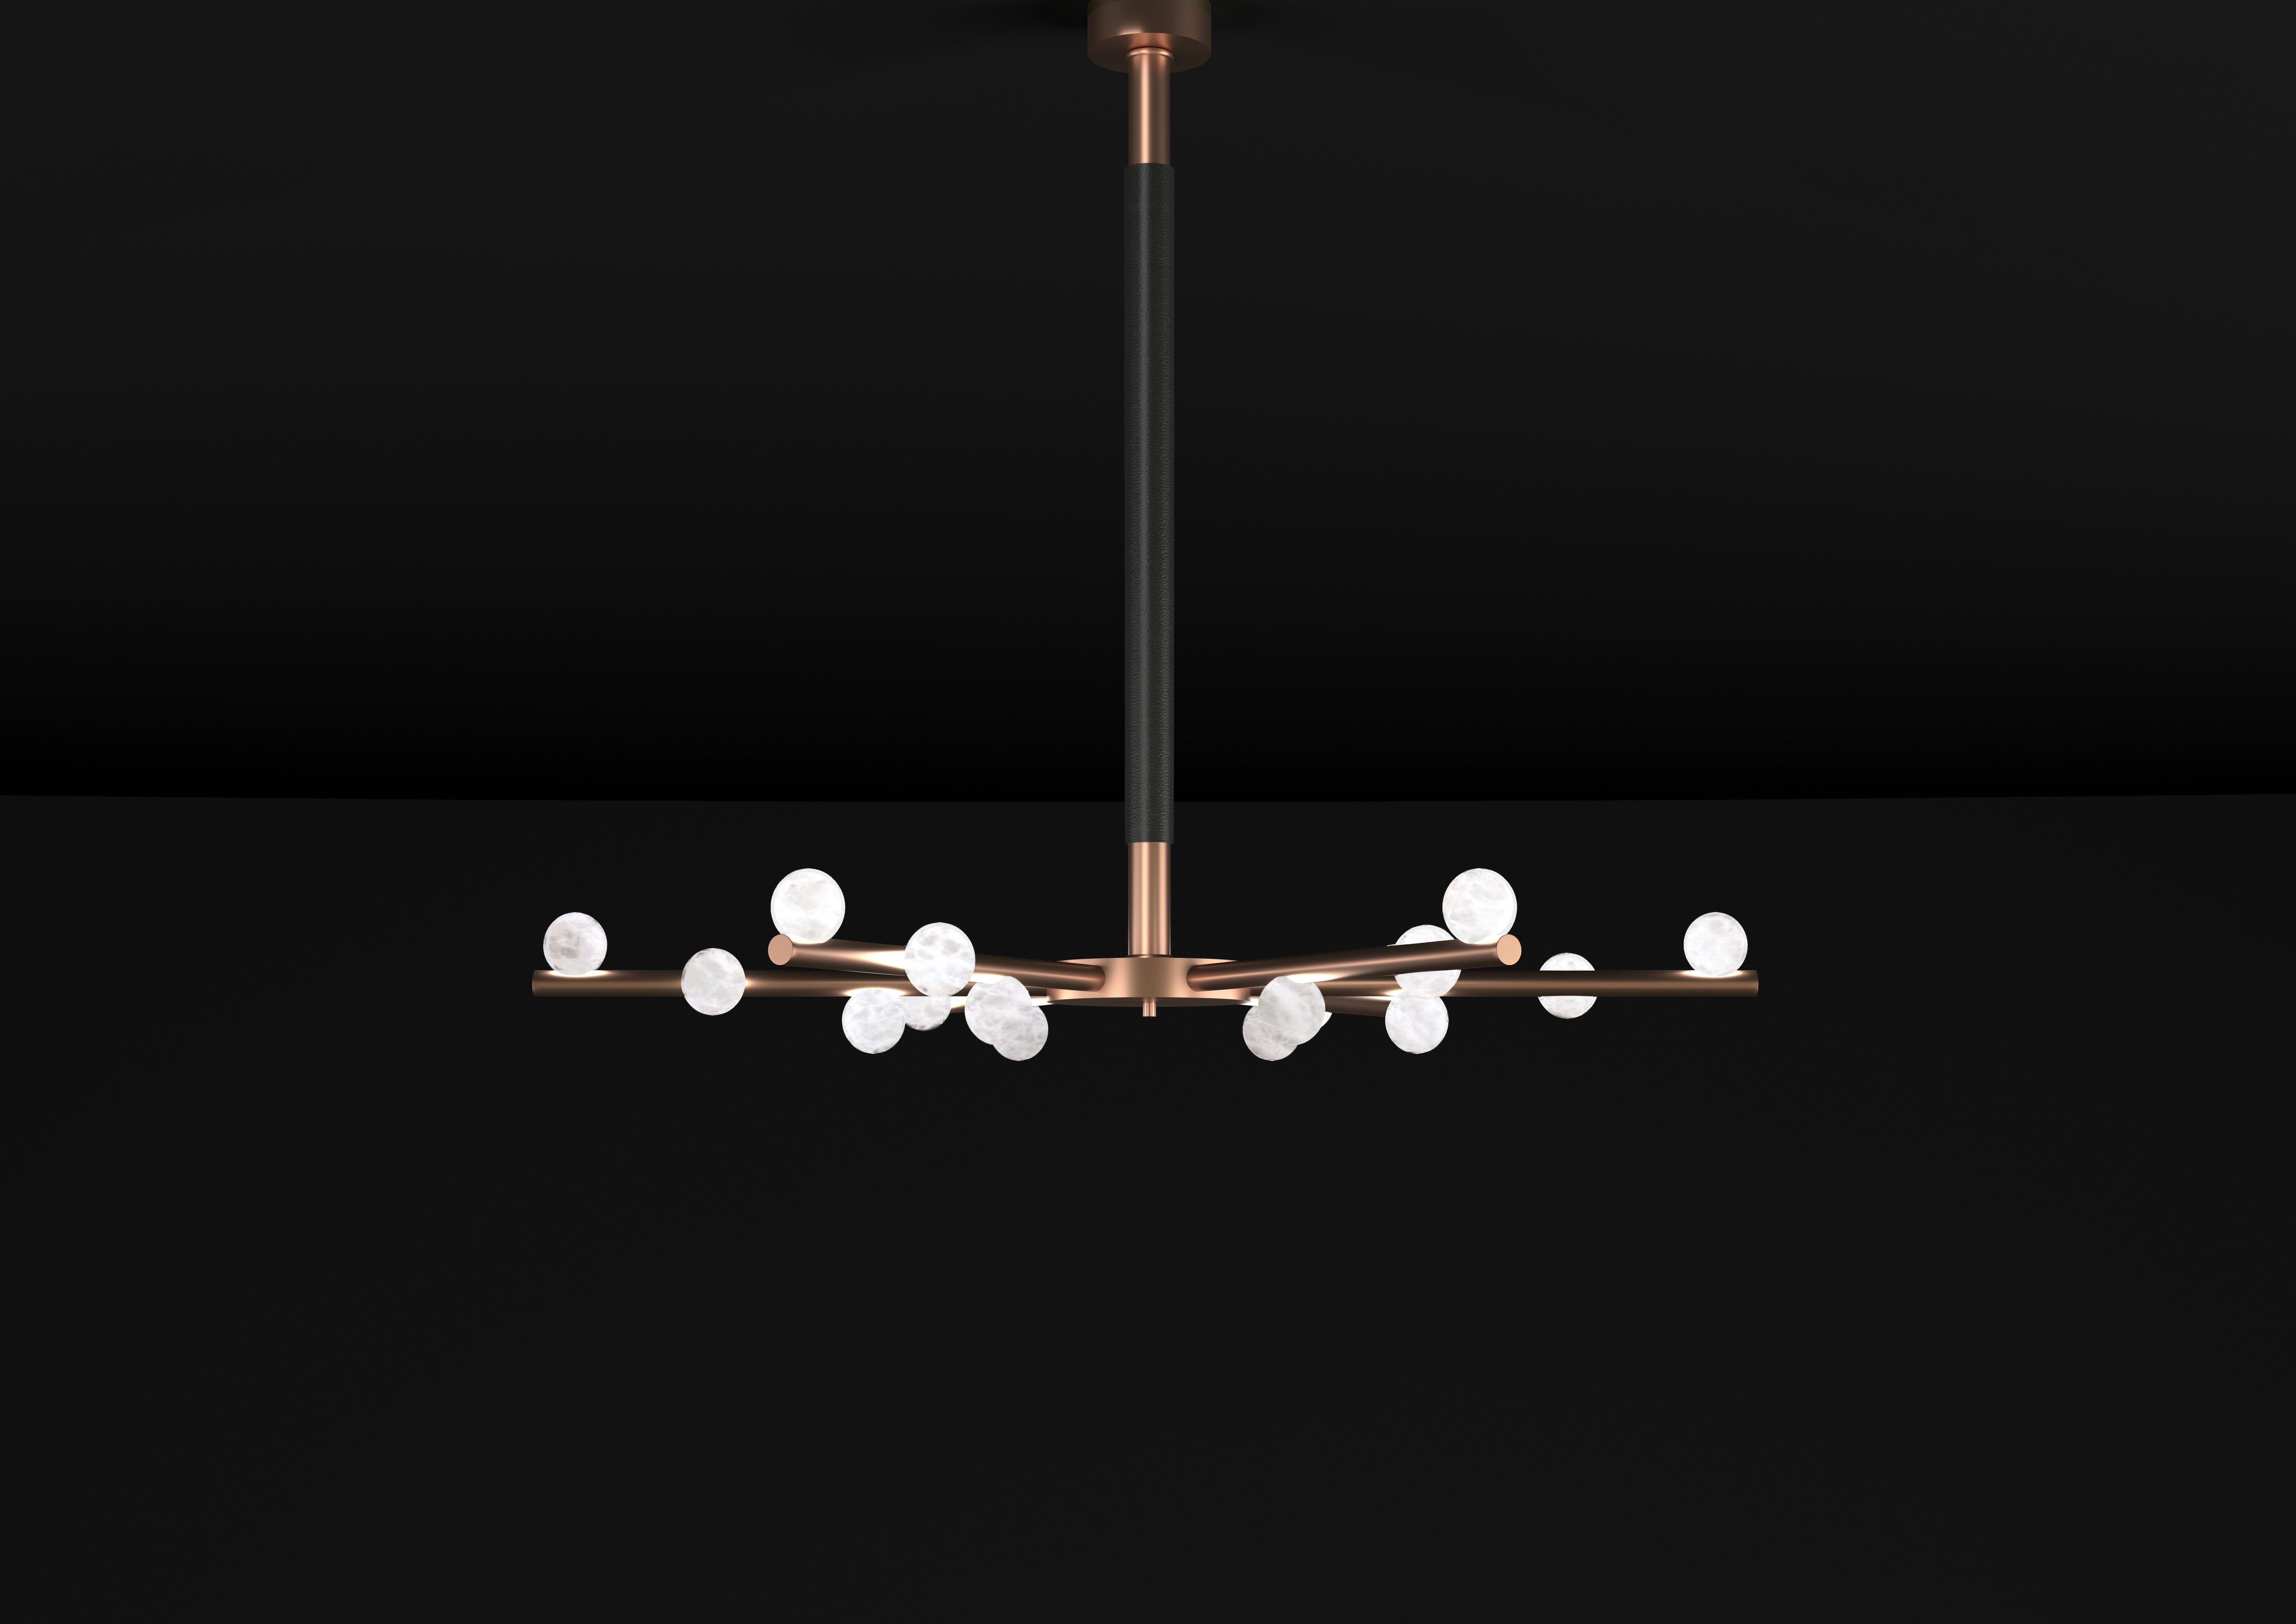 Demetra Cppper Chandelier by Alabastro Italiano
Dimensions: D 85 x W 97 x H 85 cm.
Materials: White alabaster, copper and leather.

Available in different finishes: Shiny Silver, Bronze, Brushed Brass, Ruggine of Florence, Brushed Burnished, Shiny